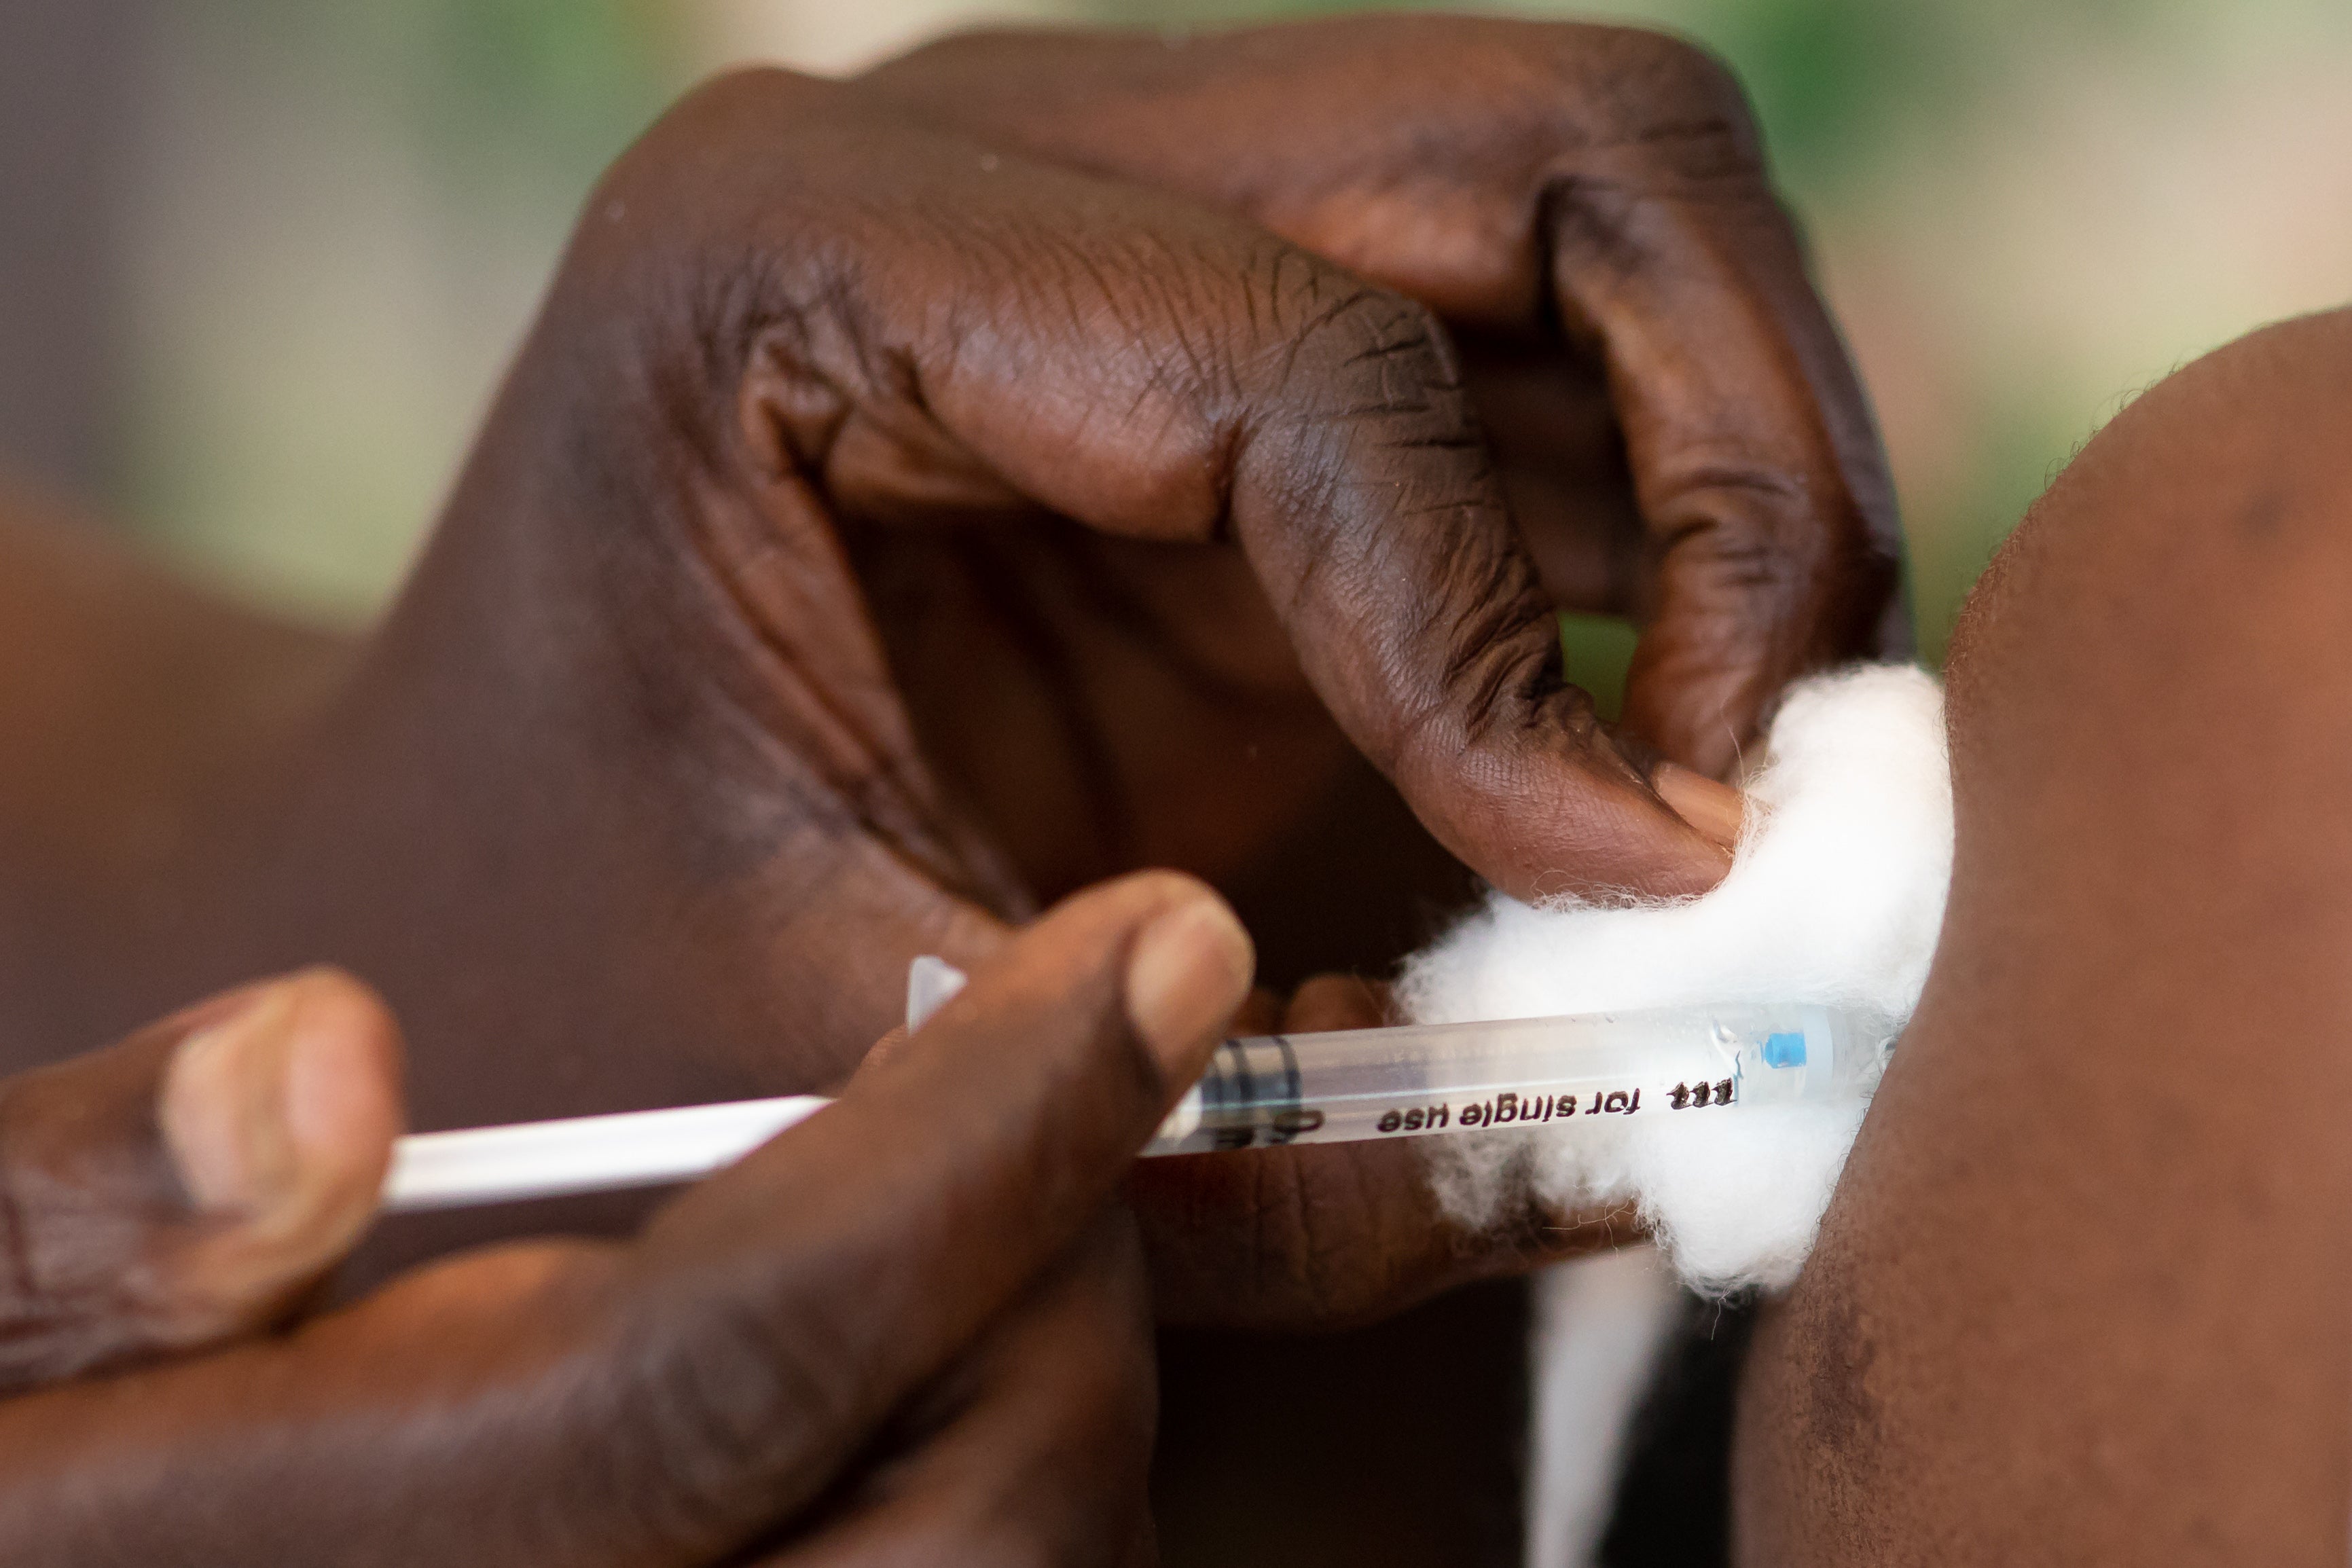 Uganda’s vaccination campagin has been slow due to lack of shots through the COVAX scheme